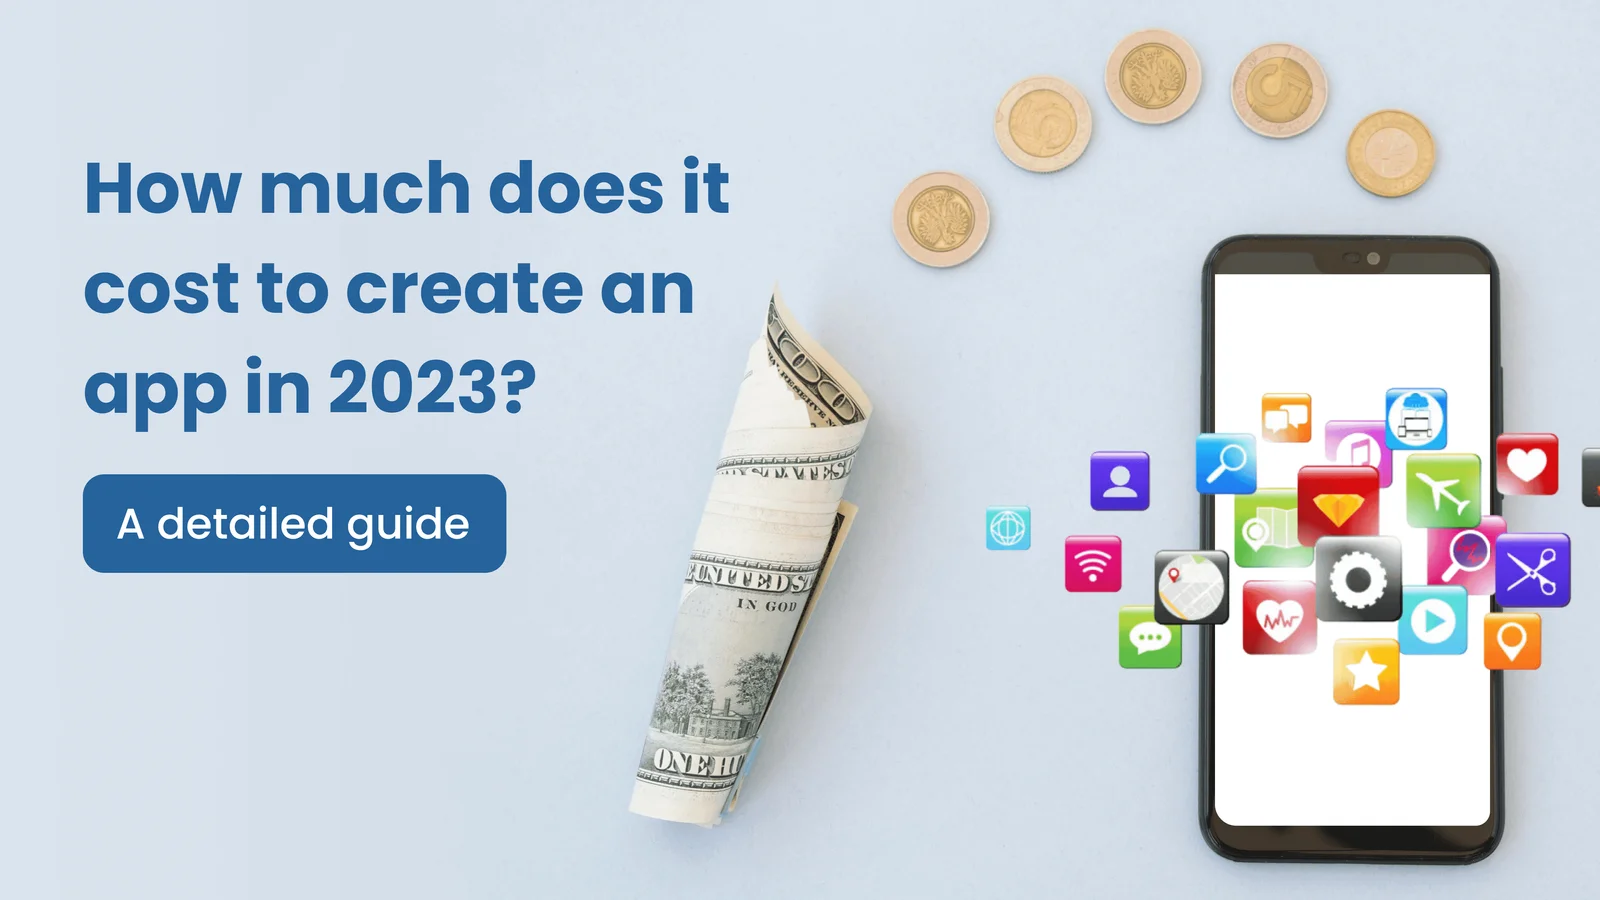 How Much Does It Cost to Create an App in 2023? A Detailed Guide